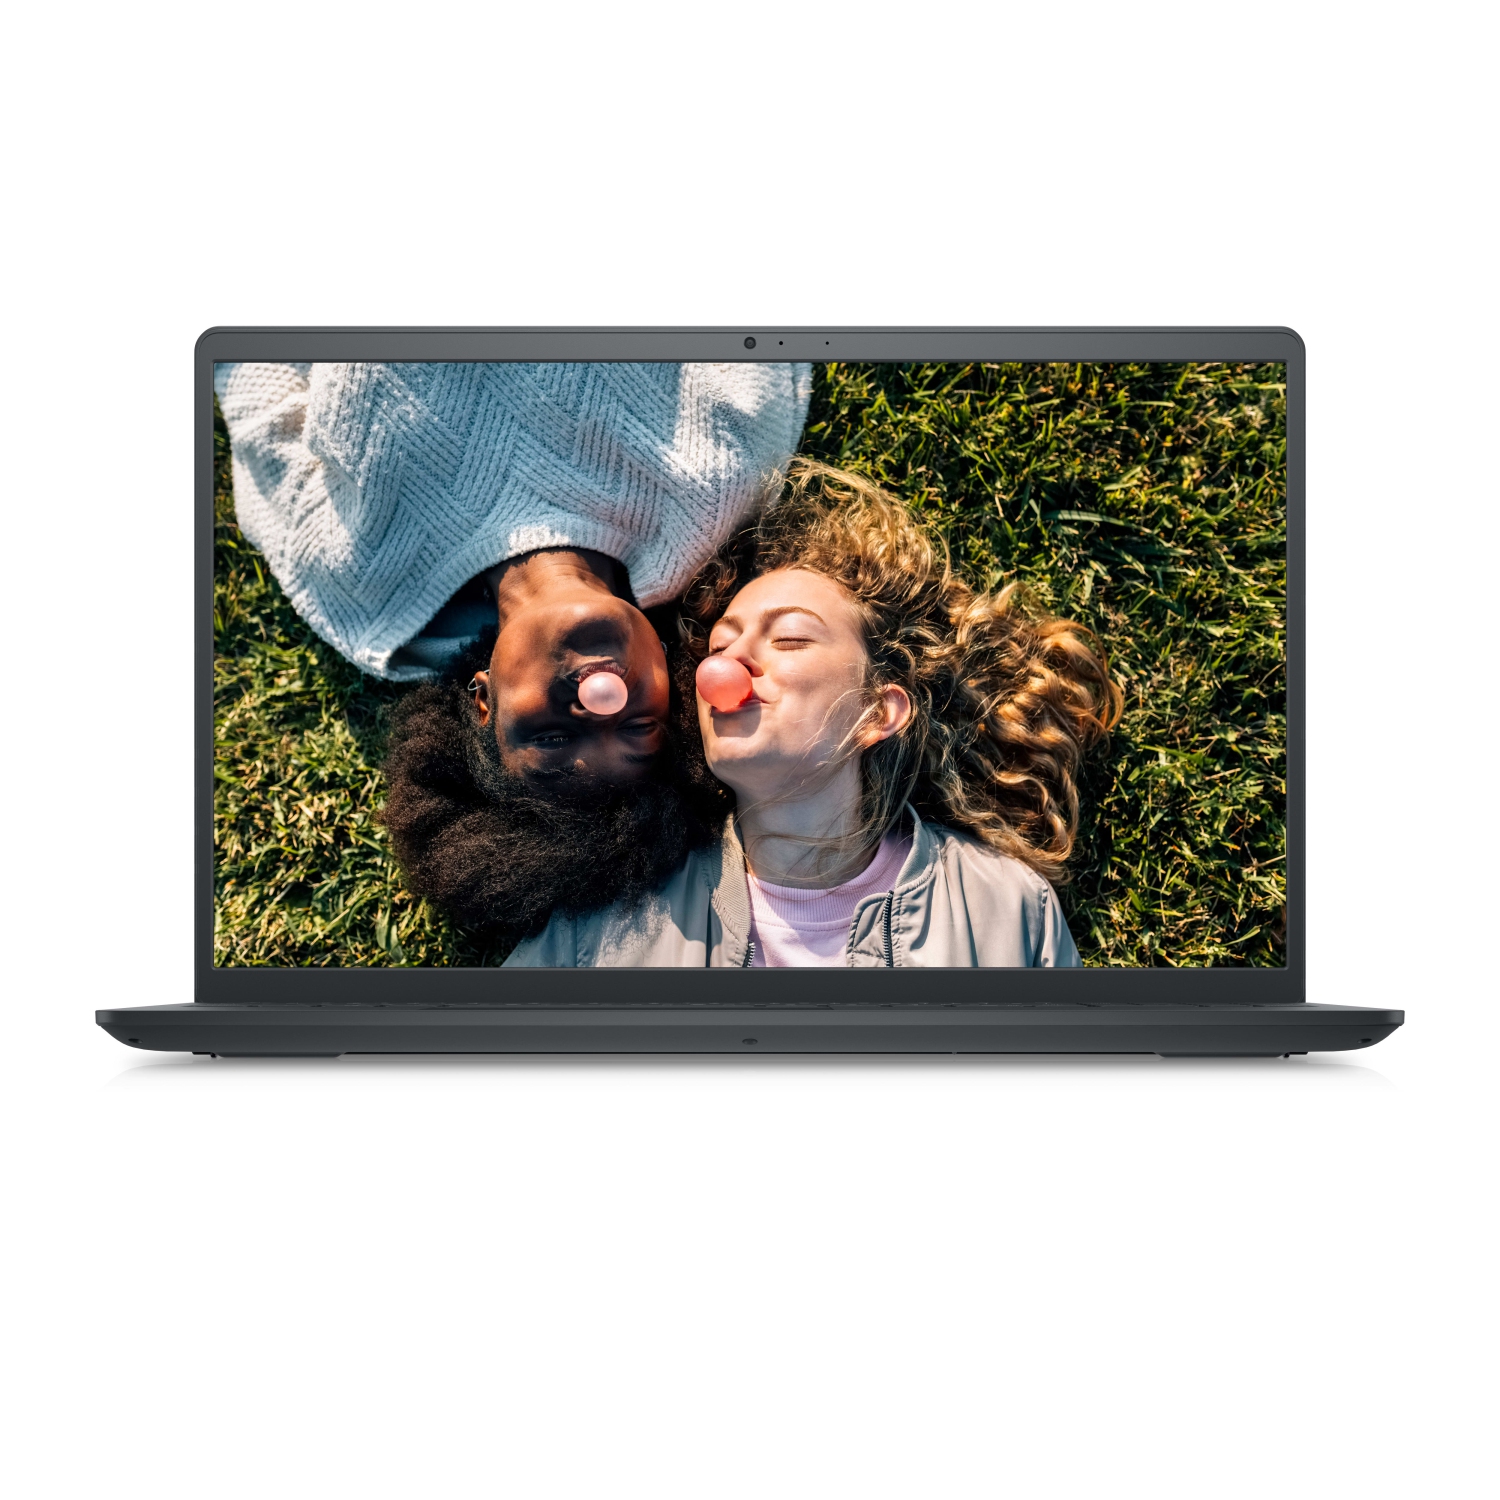 Refurbished (Excellent) – Dell Inspiron 3511 Laptop (2021) | 15.6" FHD | Core i3 - 128GB SSD - 4GB RAM | 2 Cores @ 4.1 GHz - 11th Gen CPU